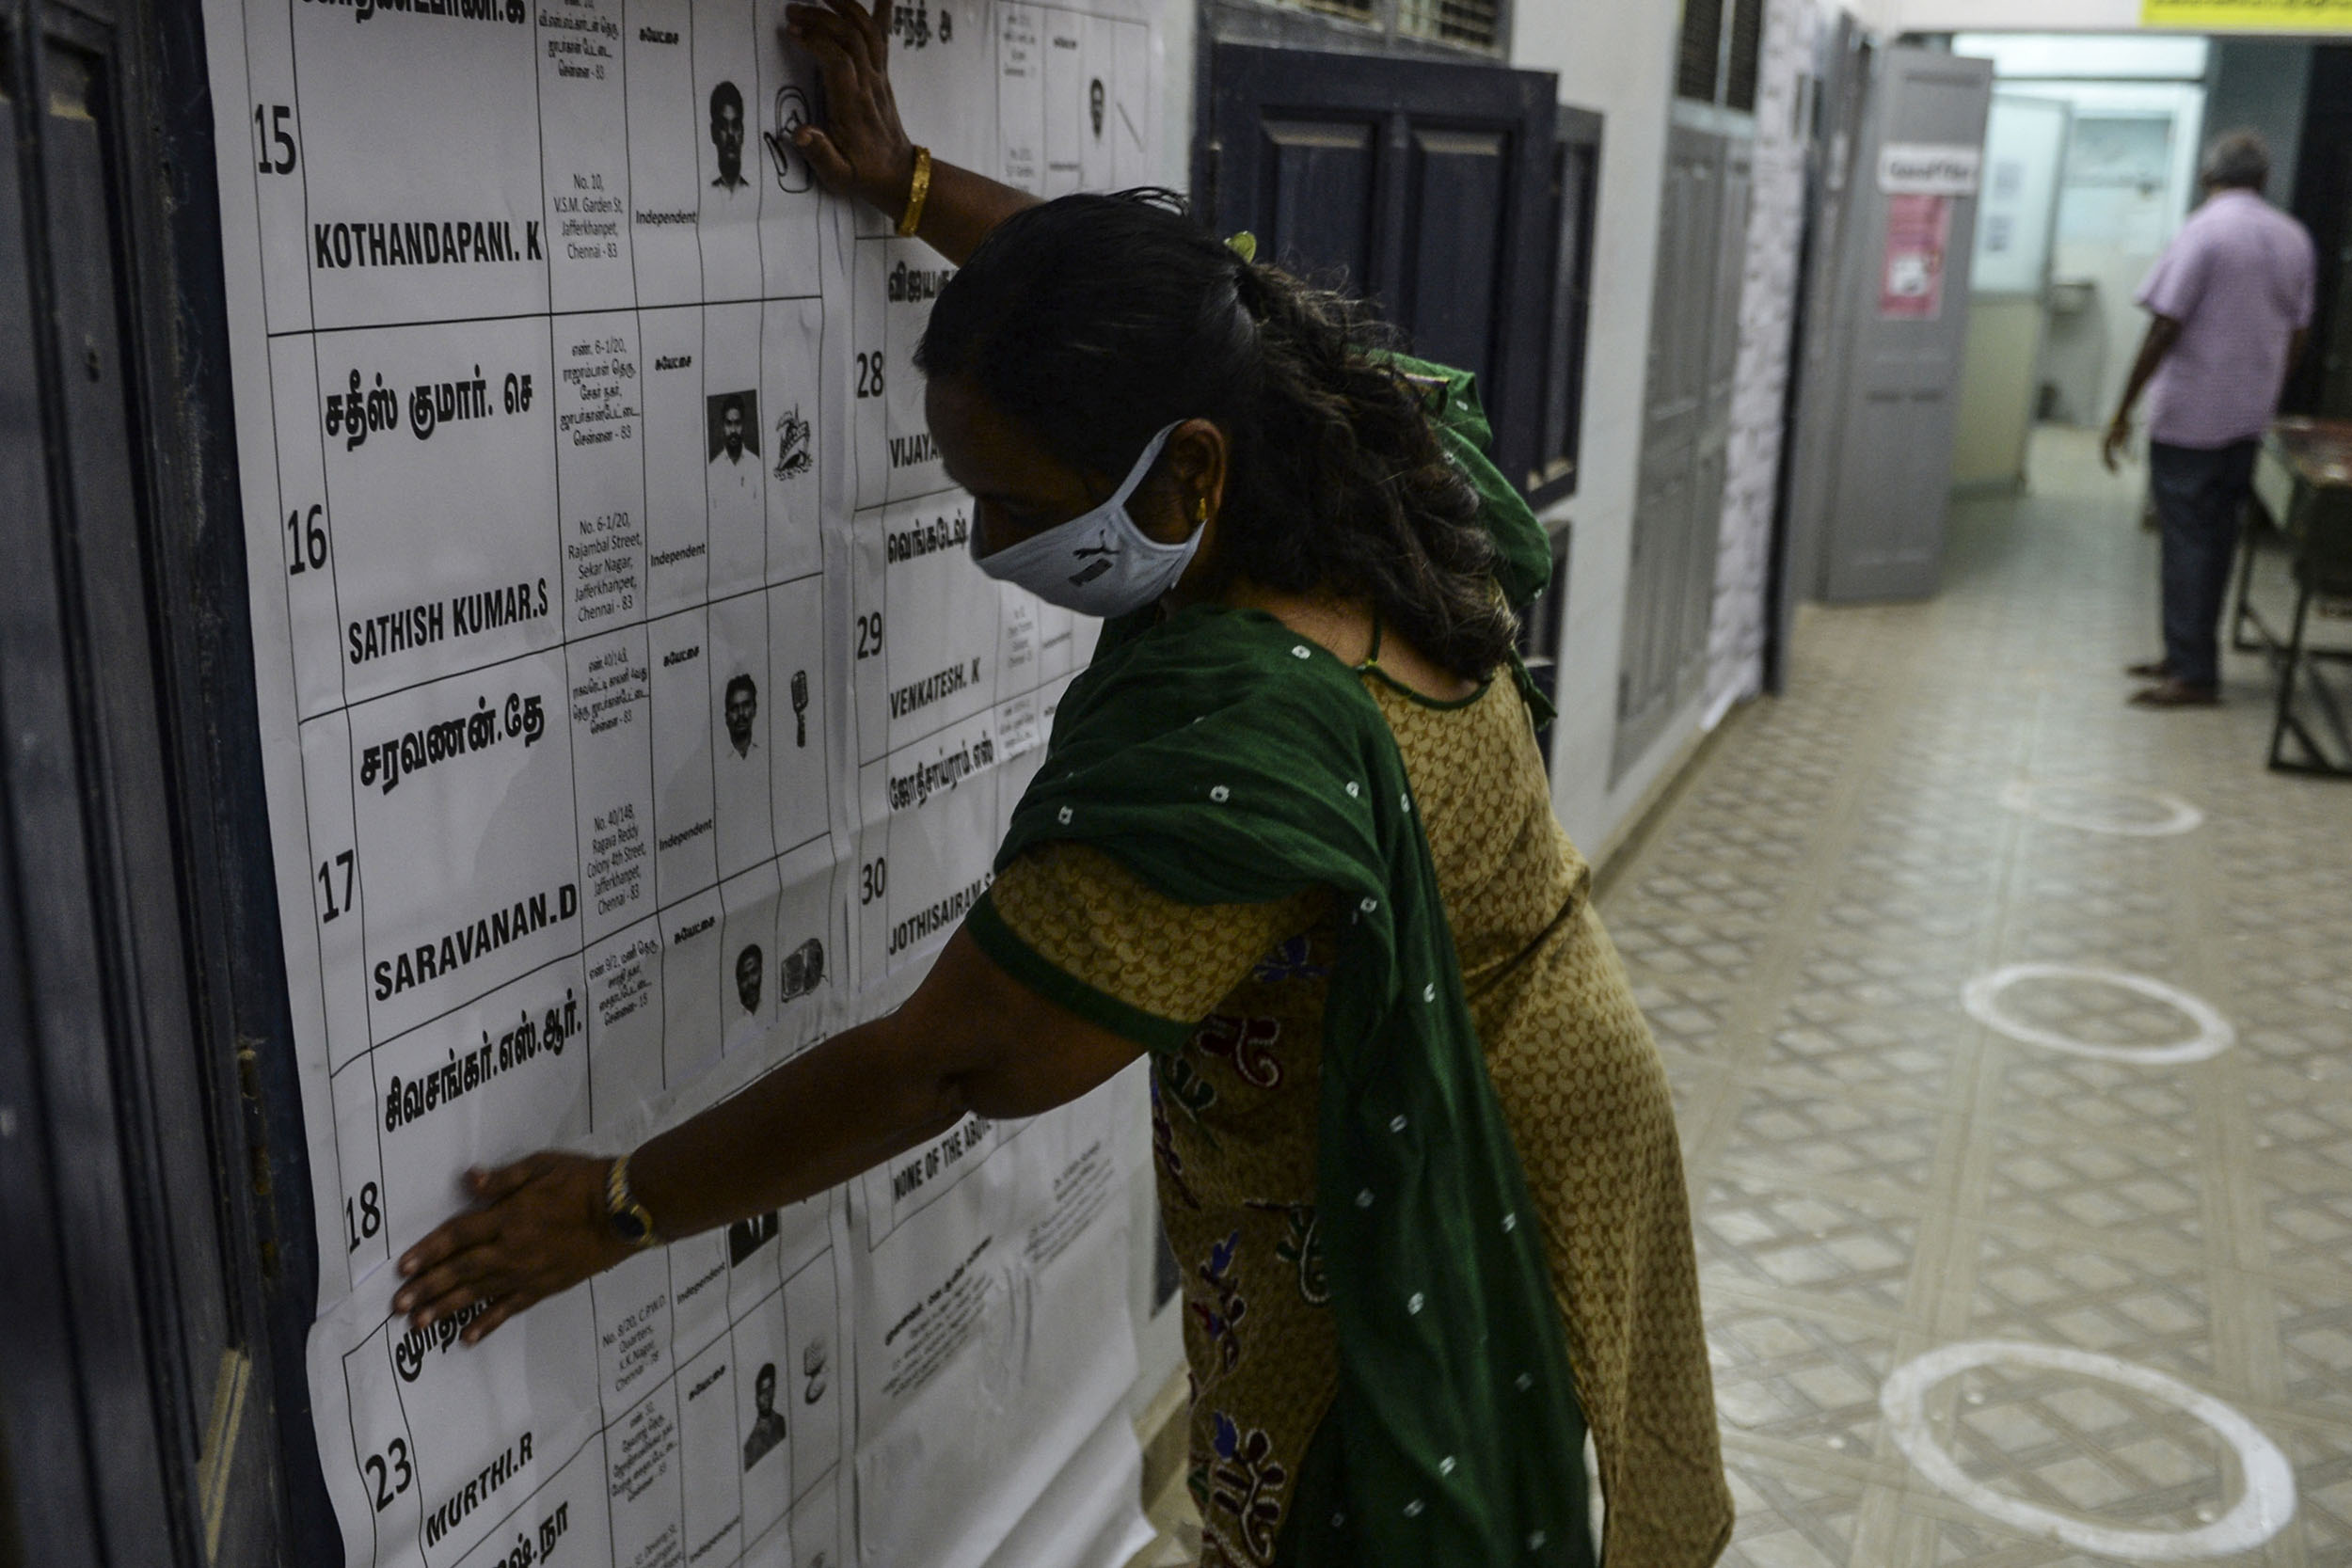 Election officials prepare polling stations on the eve of the Tamil Nadu state legislative assembly elections, in Chennai on April 5, 2021. (Photo by Arun SANKAR / AFP)